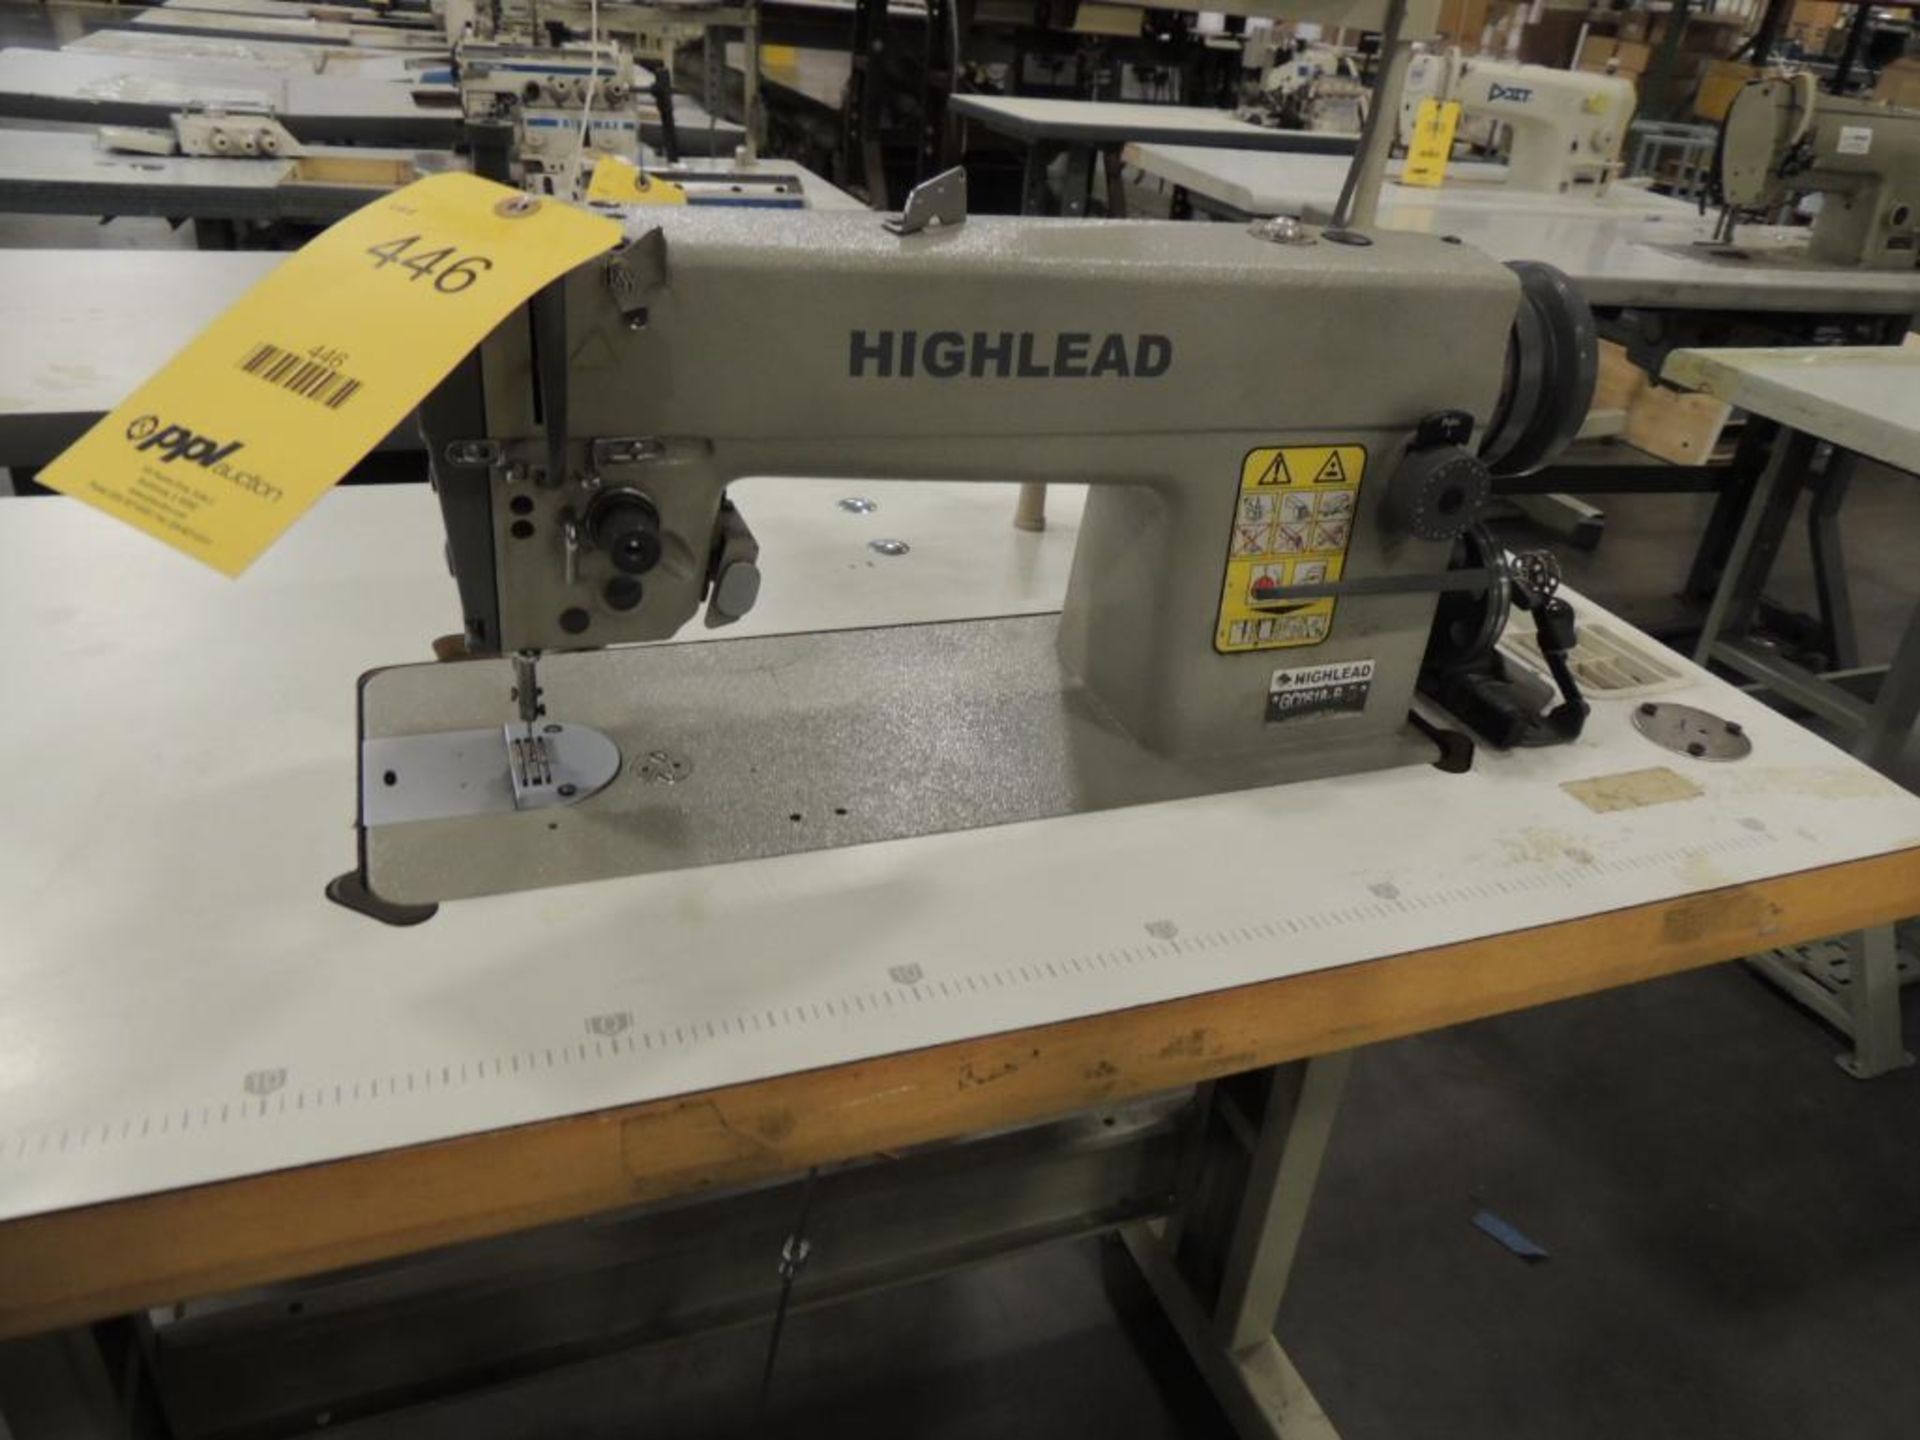 Highlead GC-0518BD Sewing Machine, on Table